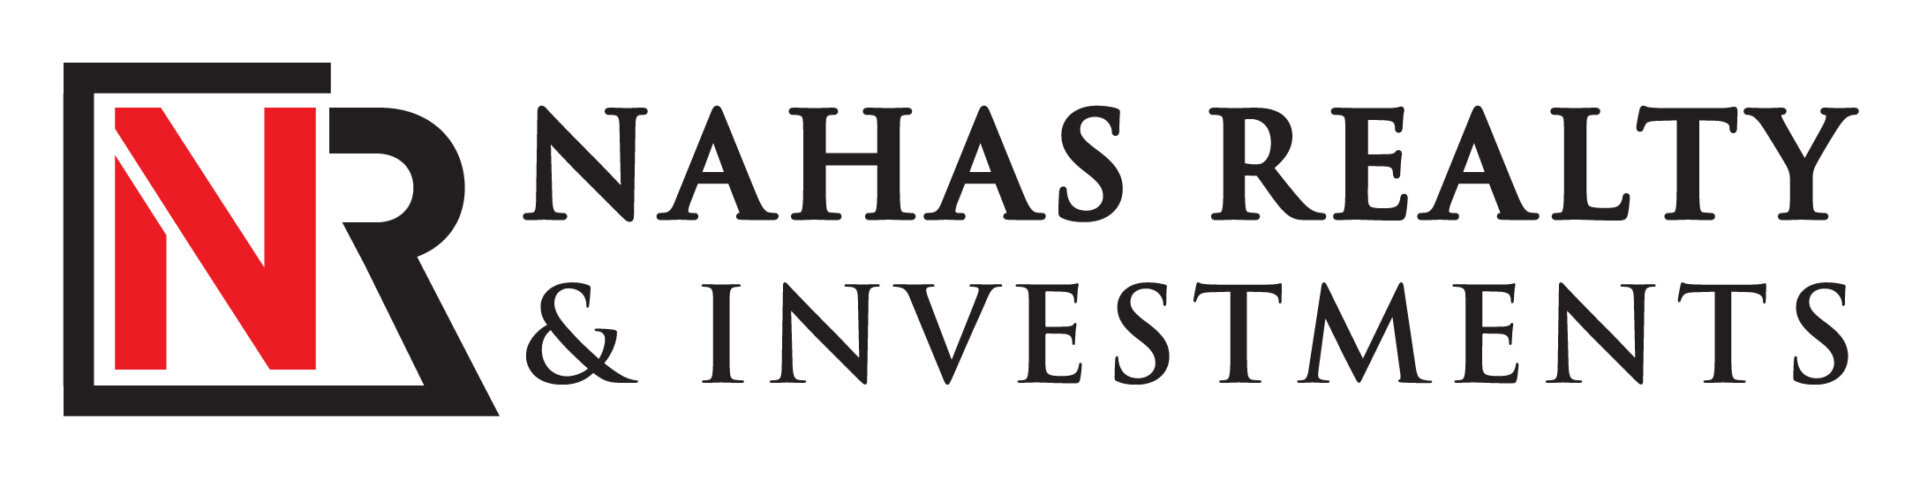 Nahas Realty & Investments logo